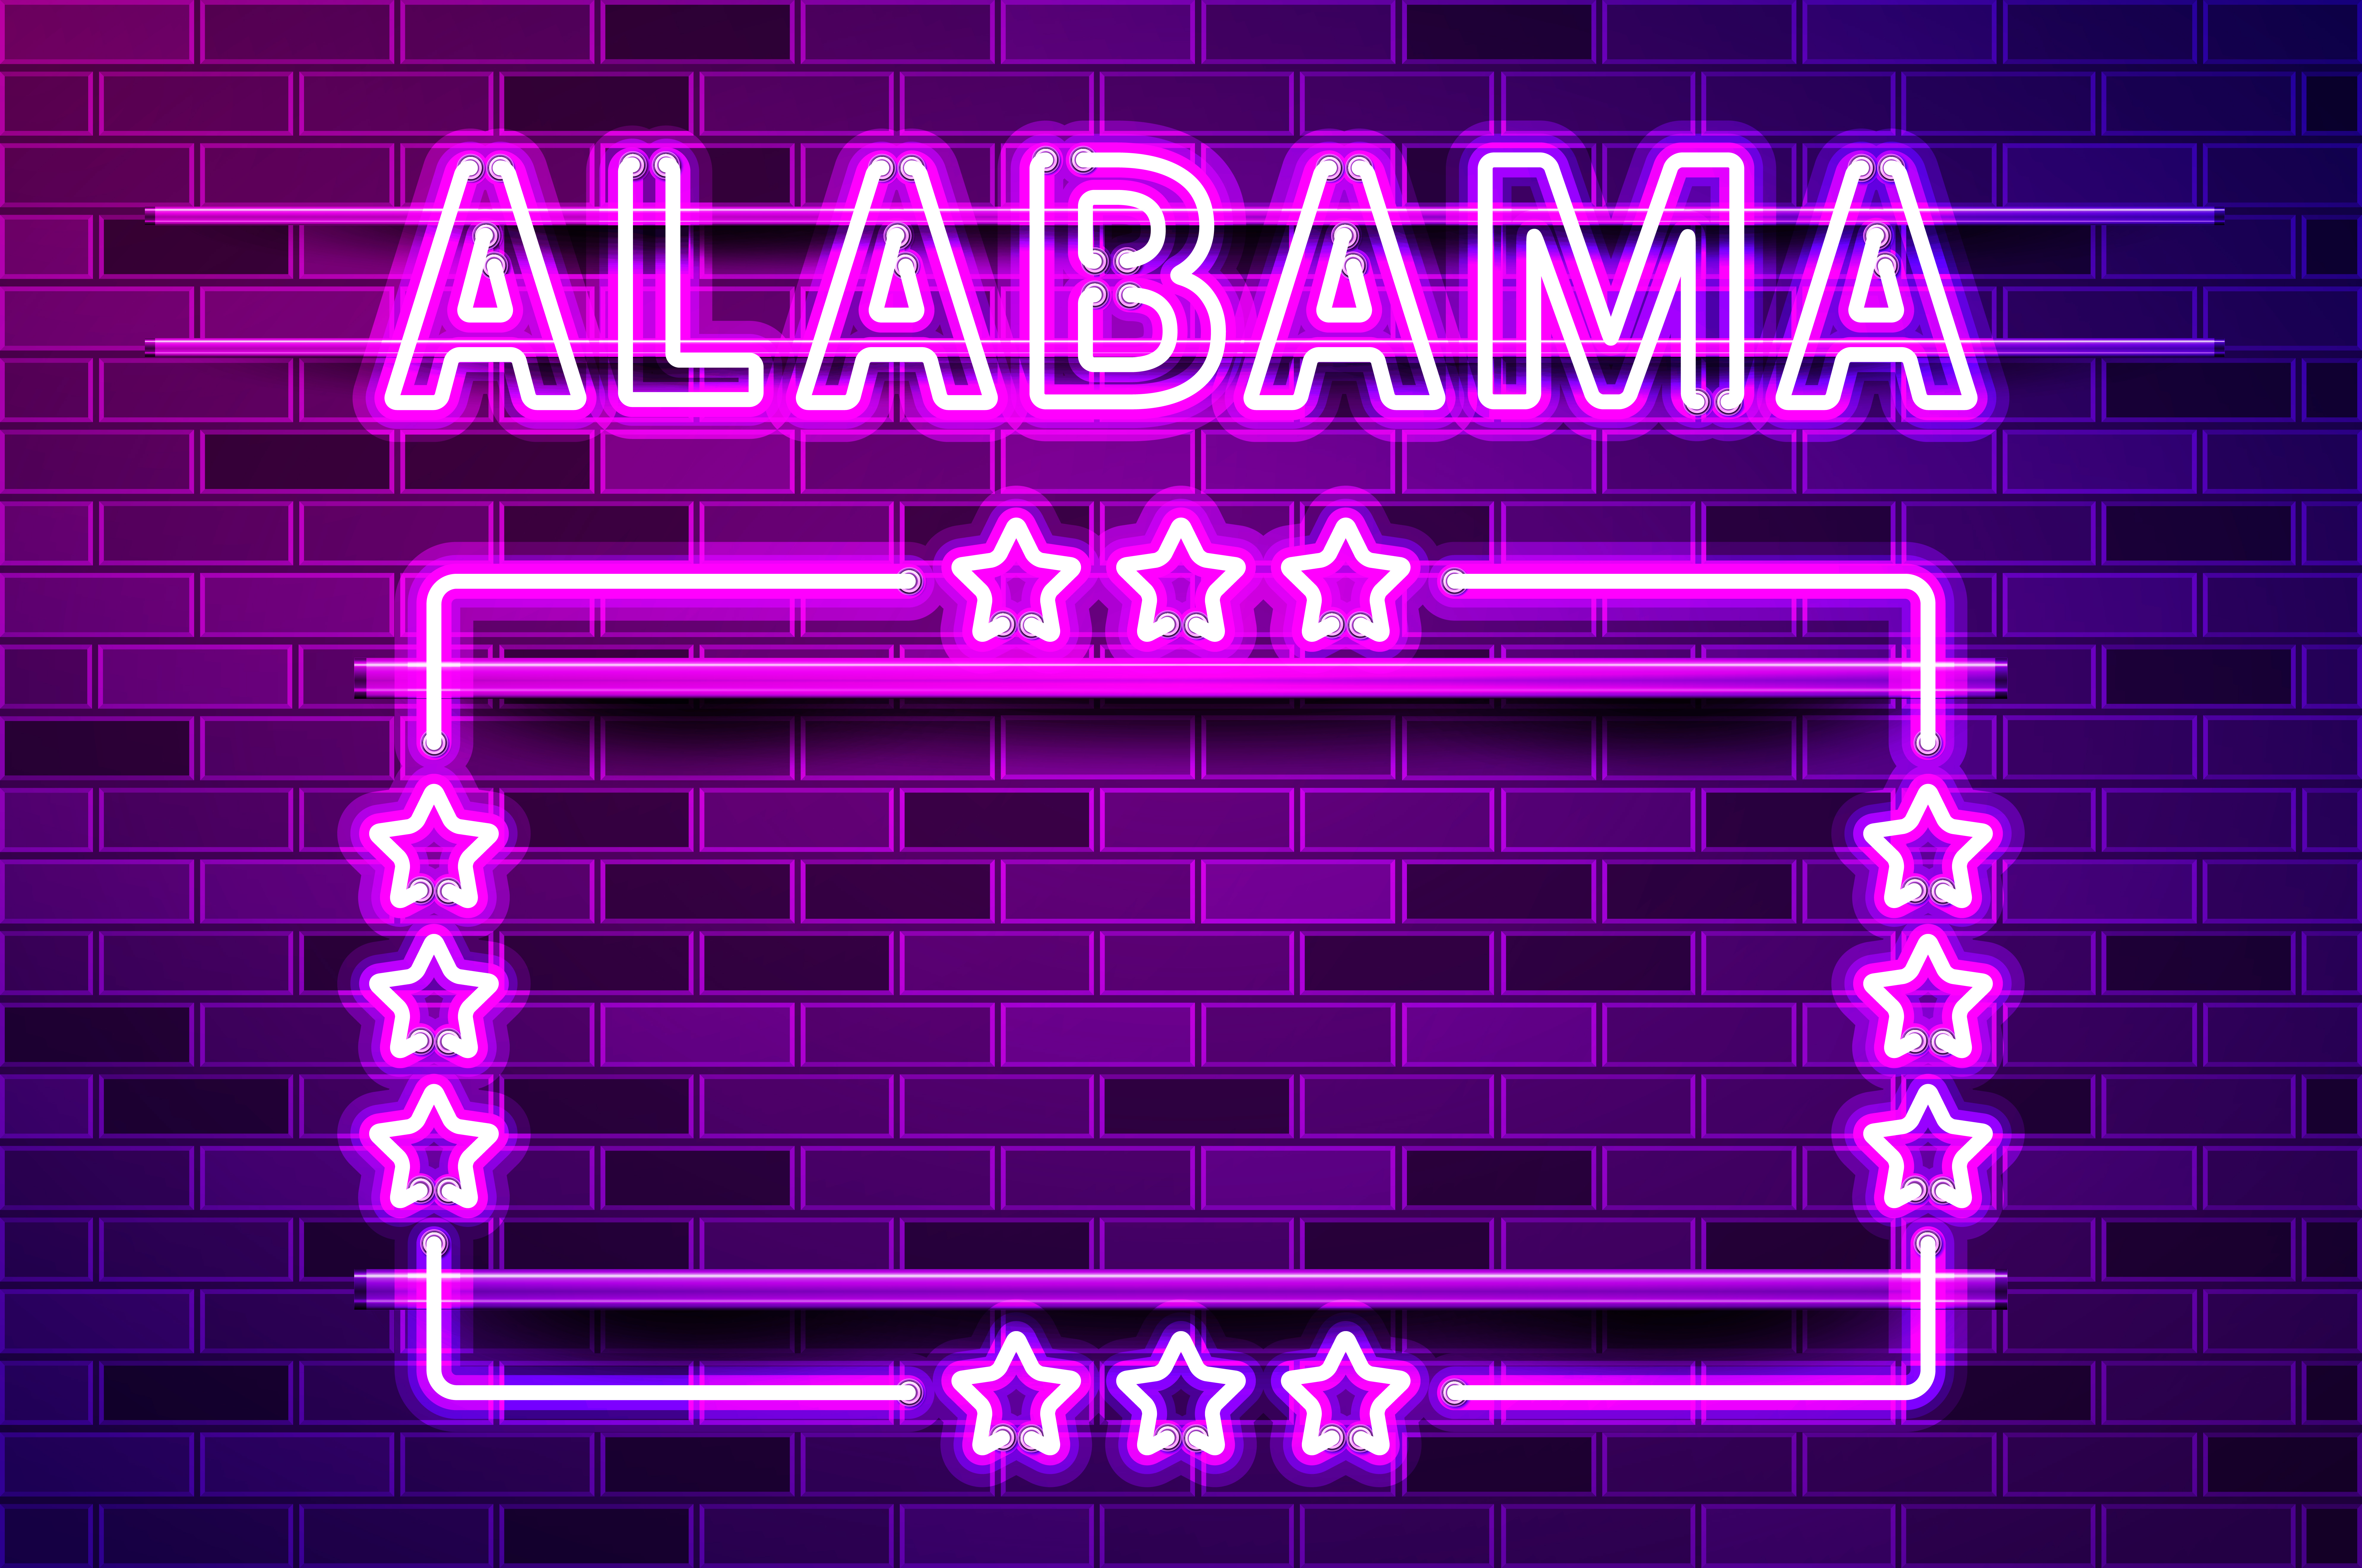 Alabama US State glowing purple neon lettering and a rectangular frame with stars. Realistic vector illustration. Purple brick wall, violet glow, metal holders.. Alabama US State glowing purple neon lettering and a rectangular frame with stars